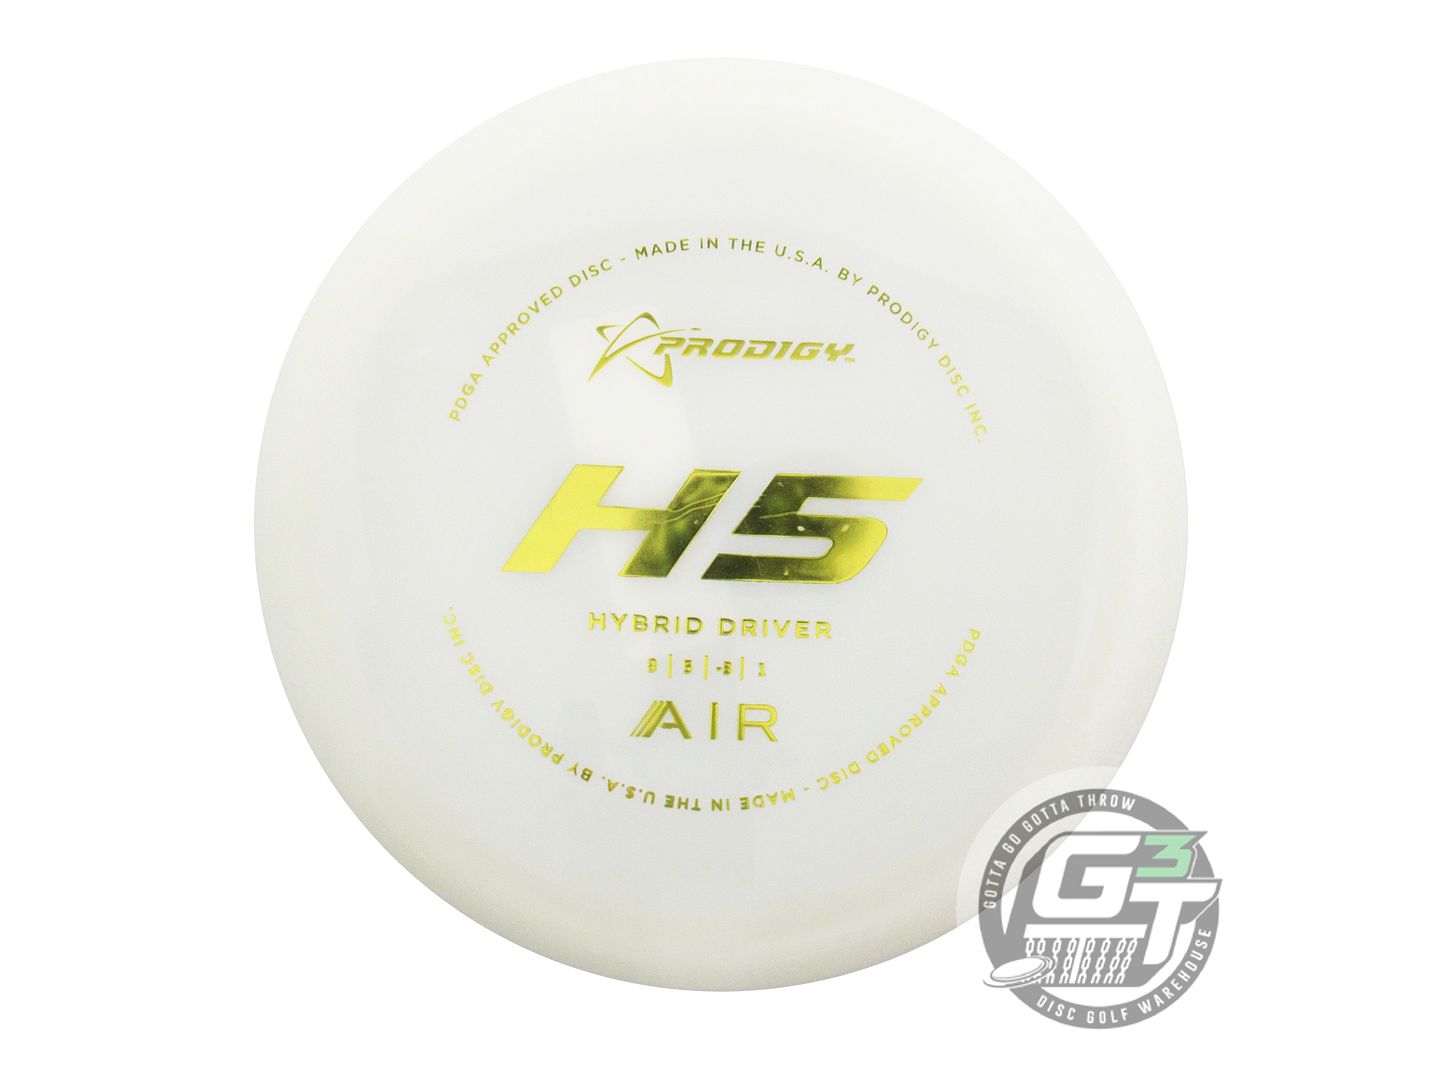 Prodigy AIR Series H5 Hybrid Fairway Driver Golf Disc (Individually Listed)